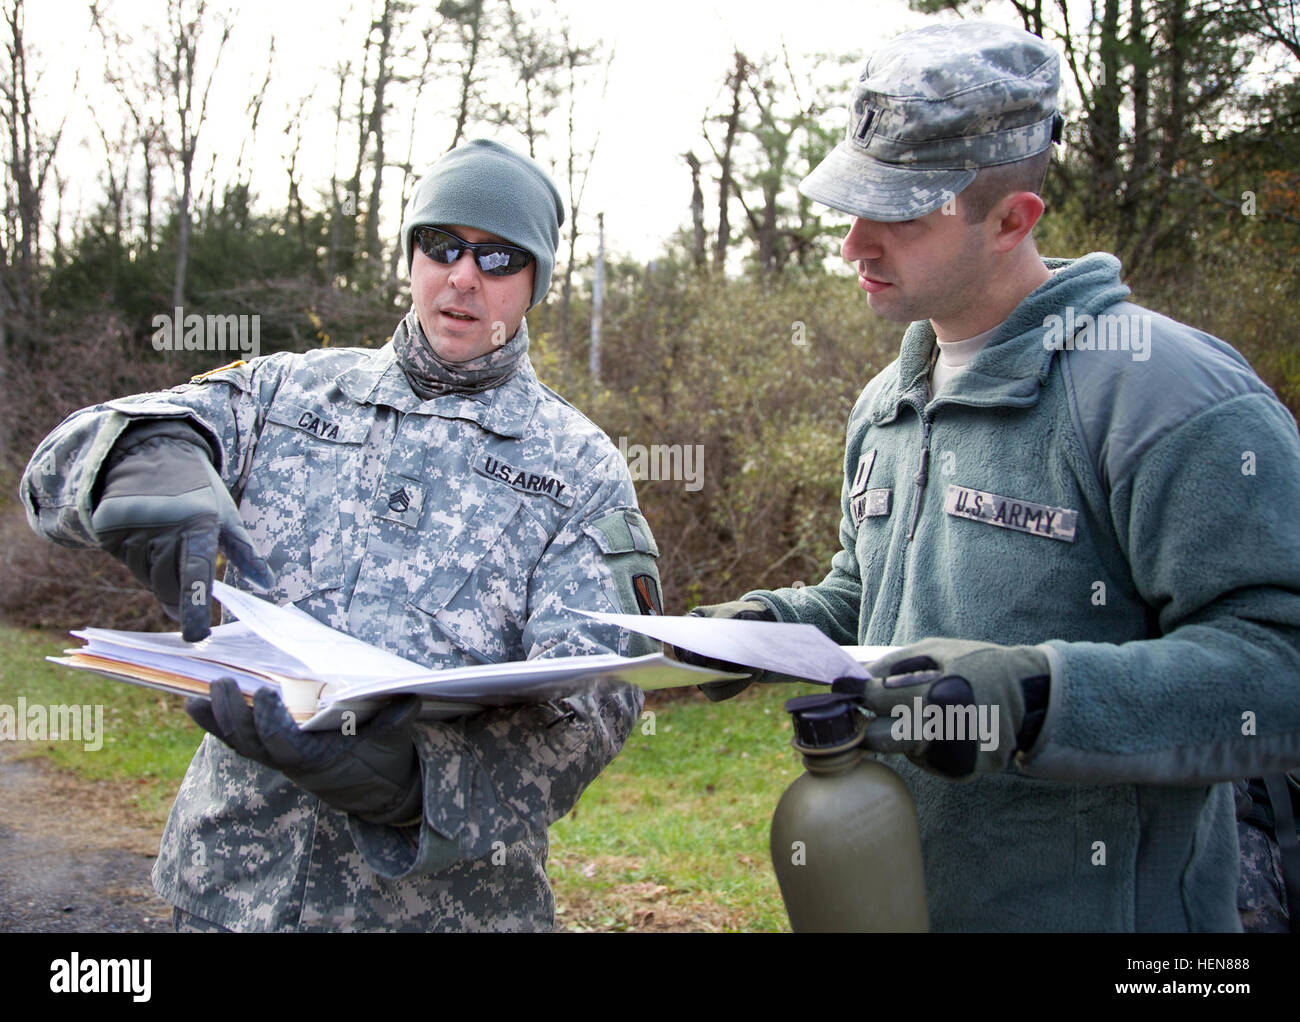 U.S. Army Staff Sgt. Michael Caya and 1st Lt. Jared Blair, attached to 55th Signal Company (Combat Camera), review paperwork during a tactical field training exercise (FTX) at the Ft. Indiantown Gap National Guard Training Center, Annville, Pa., Nov. 5, 2013. The FTX is conducted quarterly to bring soldiers together and practice tactical training from the Army Mission Essential Task List as a battalion. (U.S. Army photo by Sgt. Evangelia Grigiss/Released) 114th Signal Battalion field training exercise 131105-A-LQ527-014 Stock Photo